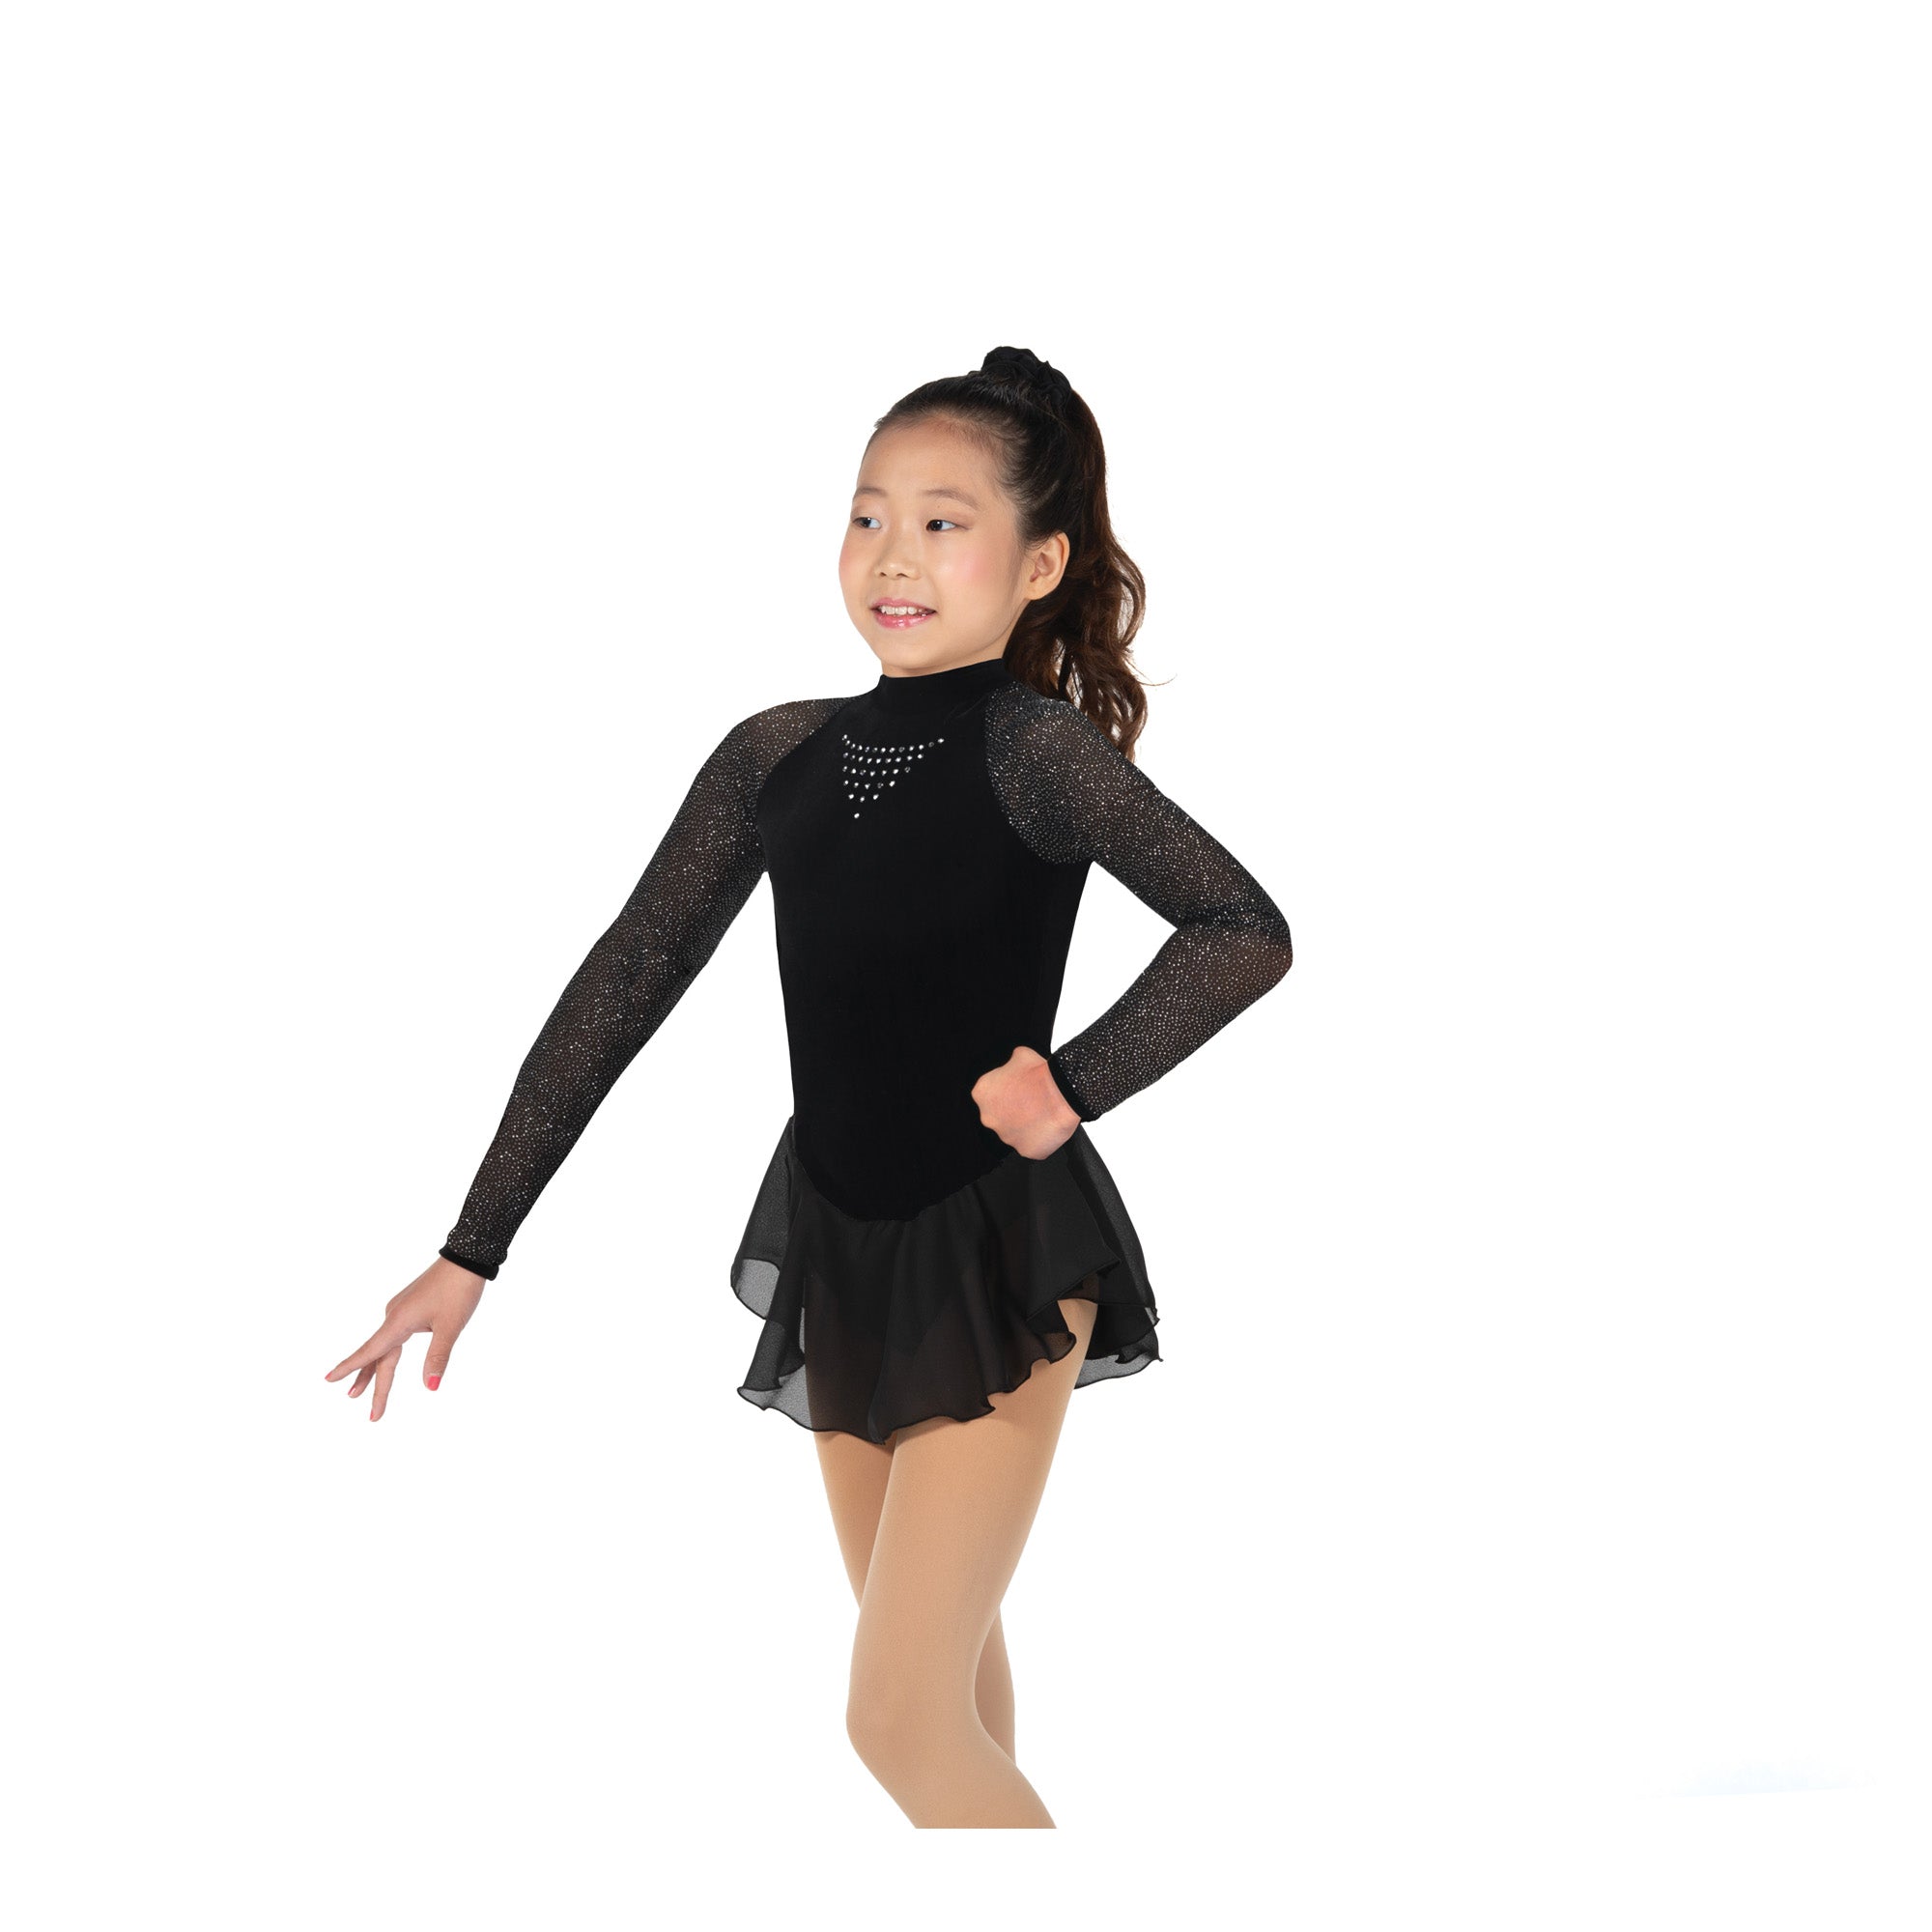 646 Starbrite Skating Dress in Black by Jerry's